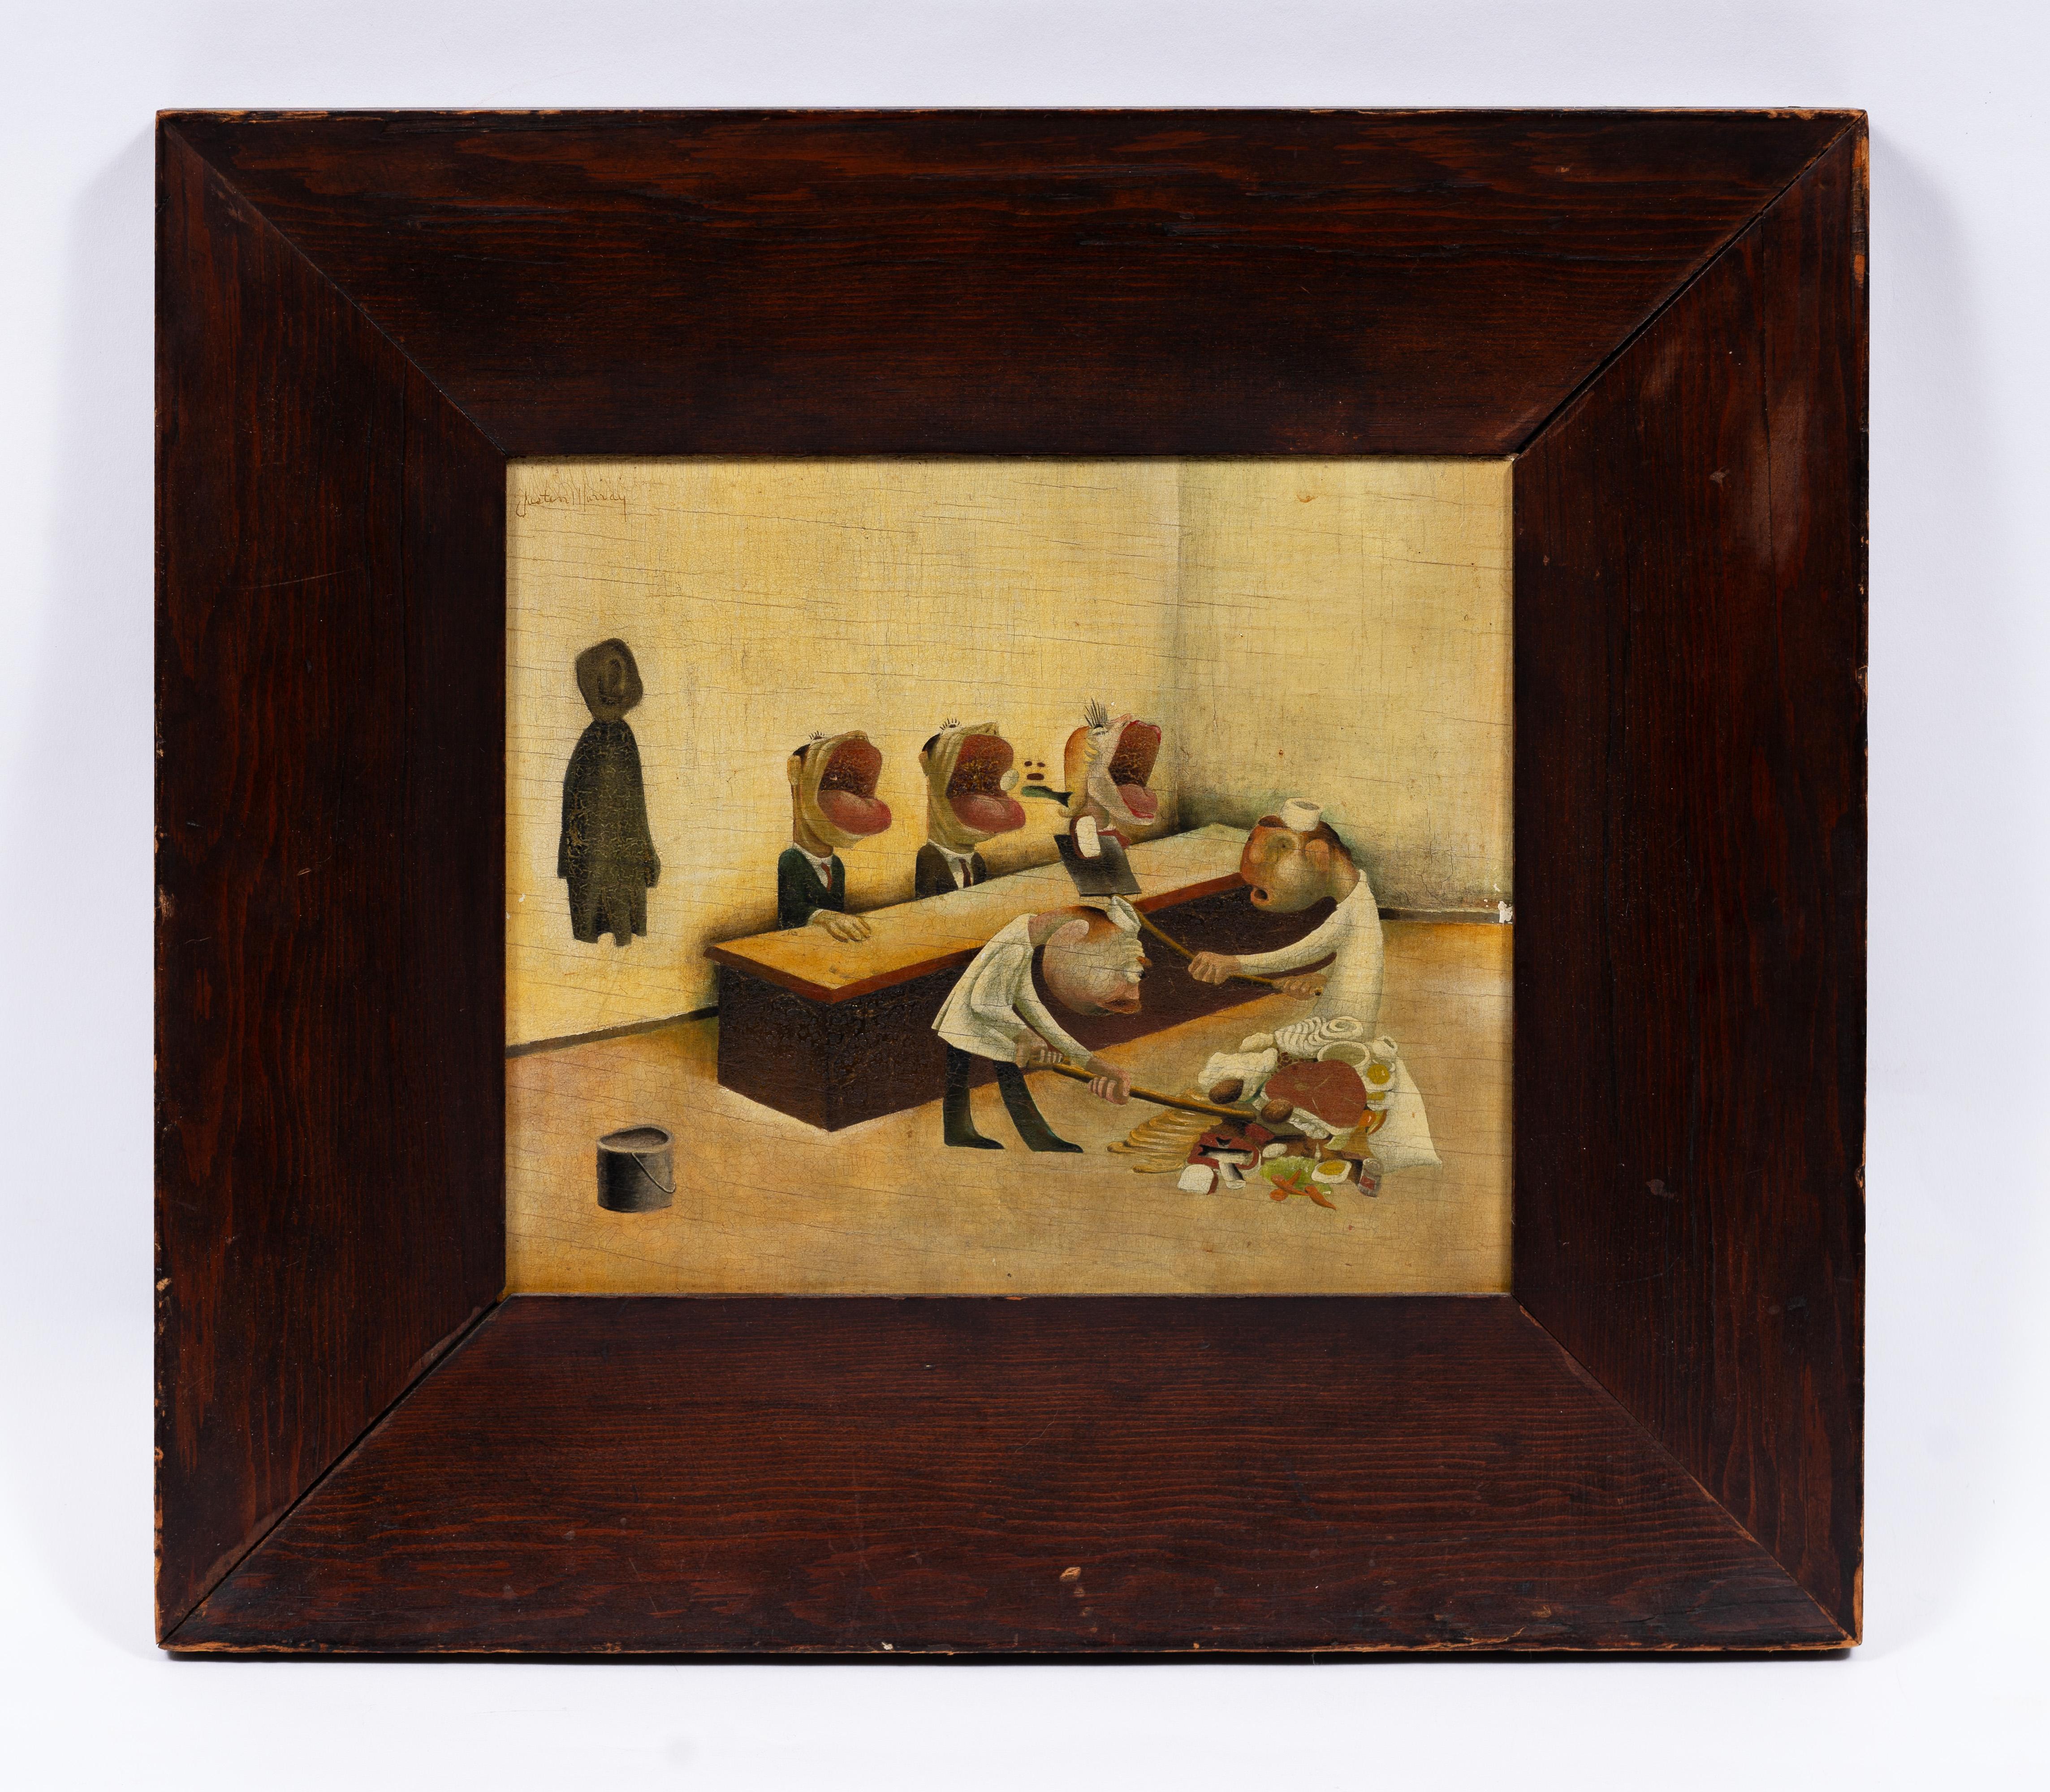 Antique American modernist interior scene of figures eating lunch by the shovel full.  Really well painted and unusual scene.  A rare early work by Justin Murray (1912 - 1987).  Signed.  Another great painting verso as well.  Nicely framed.  